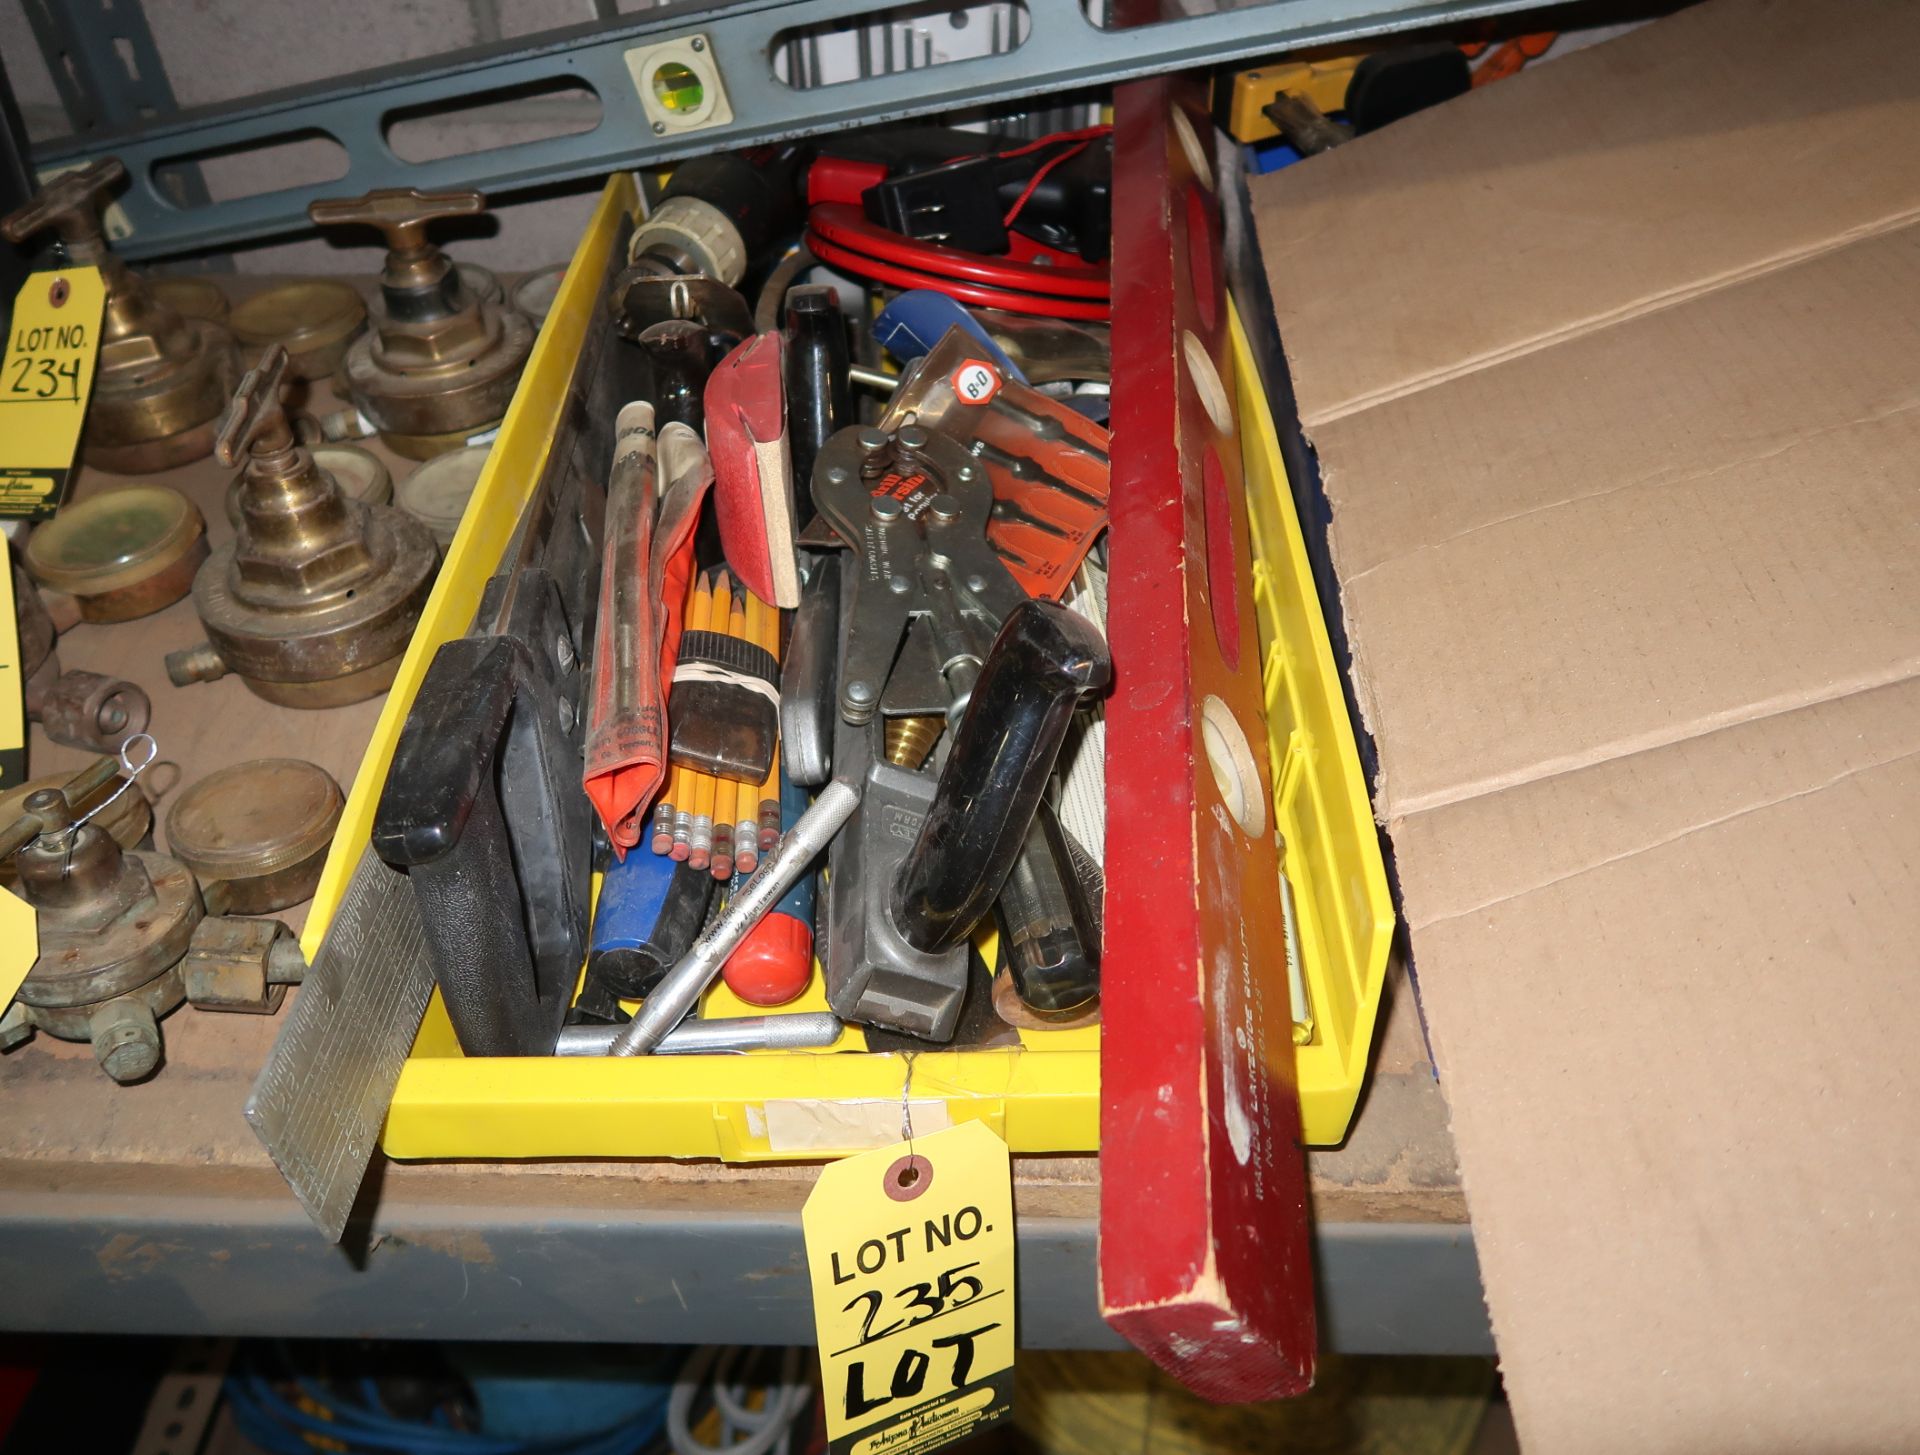 ASSORTED TOOLS; PLANERS, SAWS, SCREWDRIVERS, ETC.